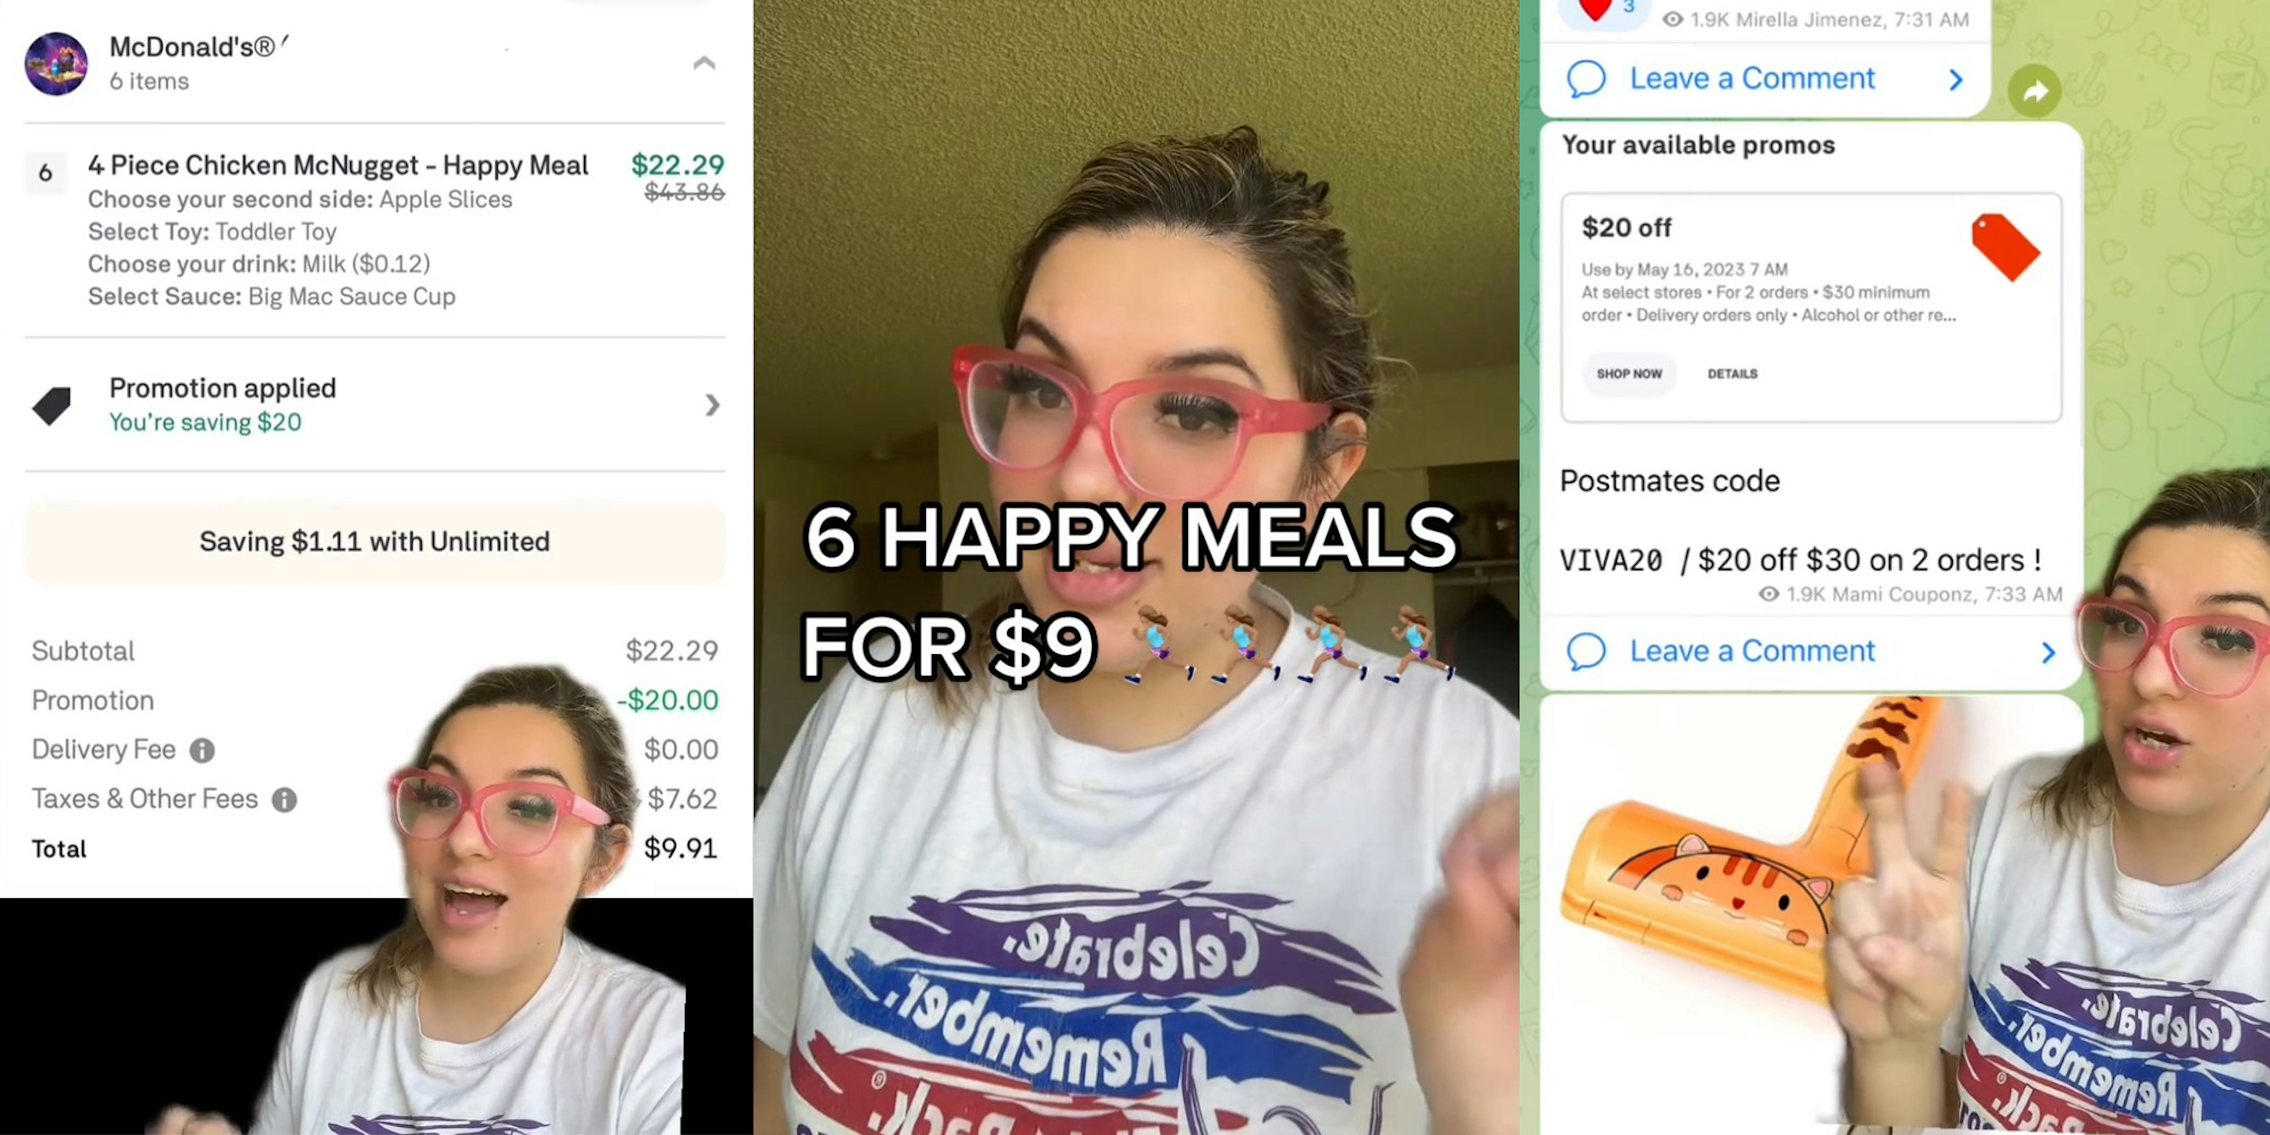 McDonald’s app customer shows how to get 6 Happy Meals for $9